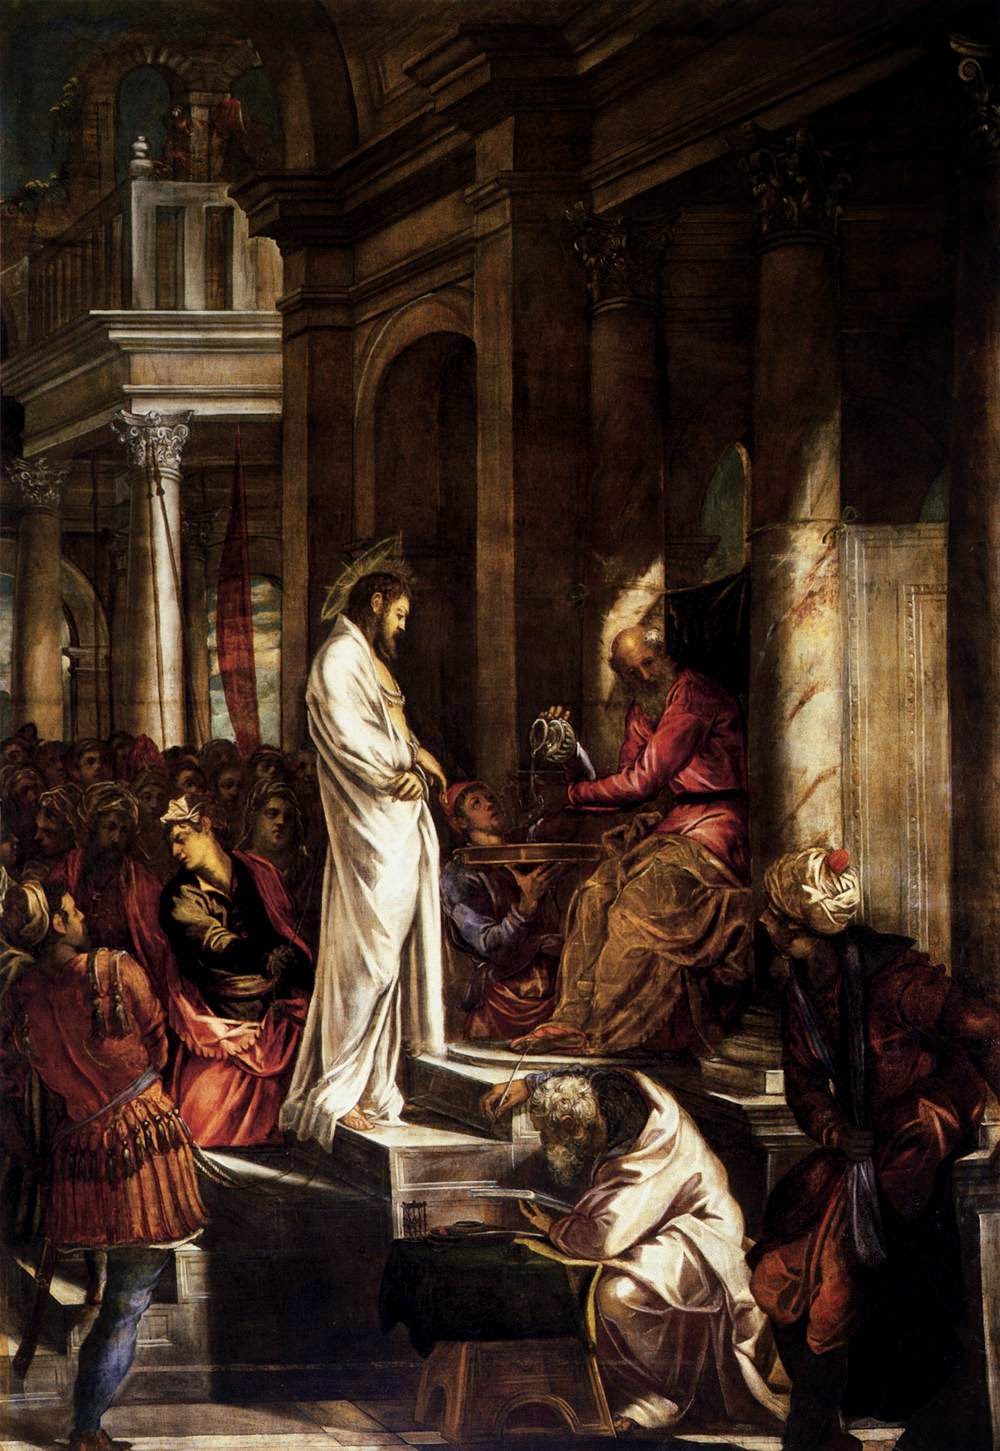 Jesus Christ and Christian Pictures: Paintings of the Trial of Jesus